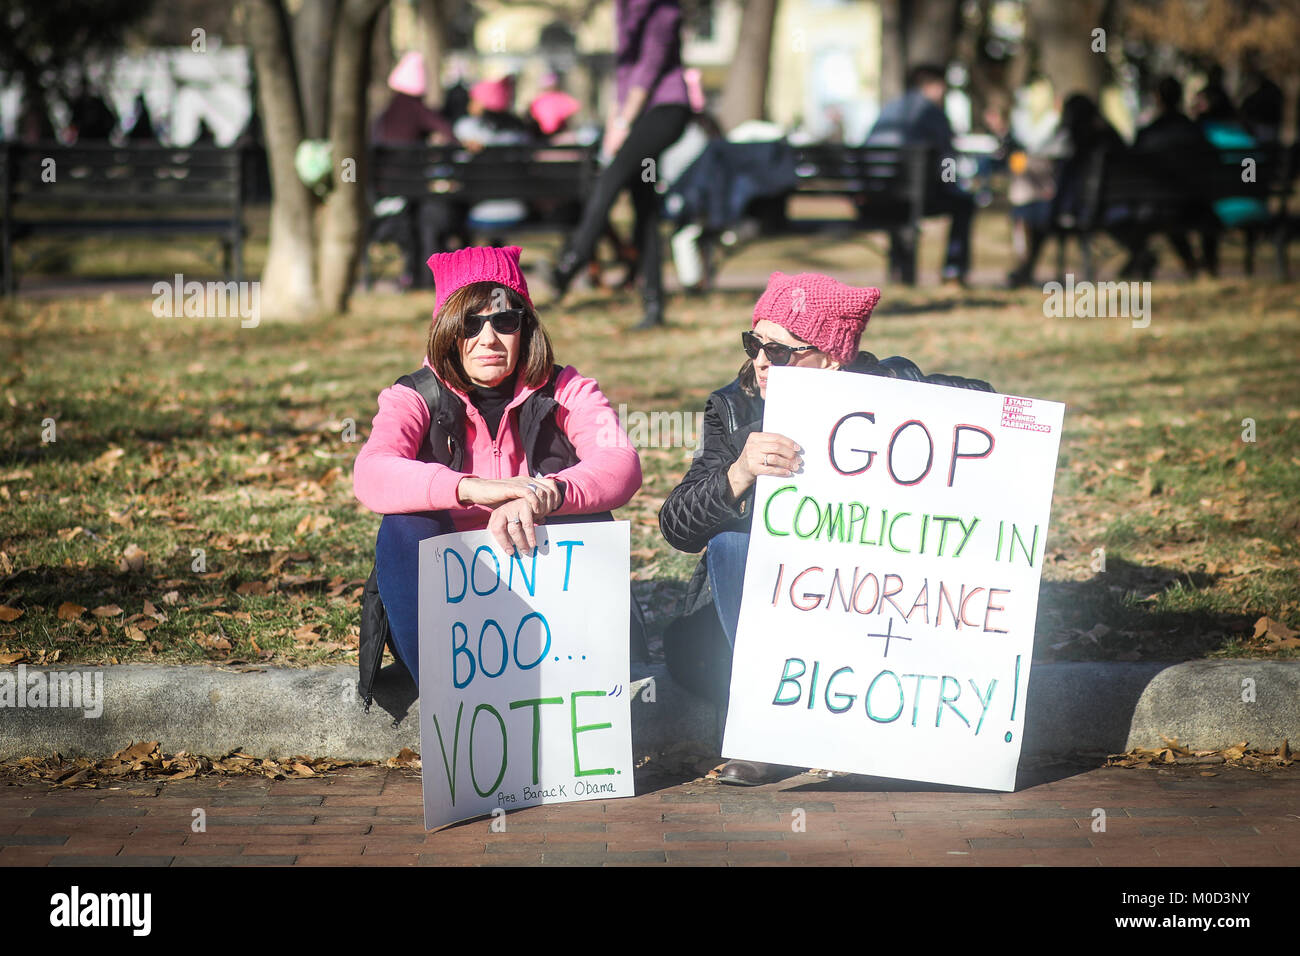 WASHINGTON, DC, USA. 20th January, 2018. Nearly a year after the historic Women's March on Washington, activists gather in the US capital once again to make their voices heard. Protesters marched from the Lincoln Memorial to the White House. Credit: Nicole Glass / Alamy Live News. Stock Photo